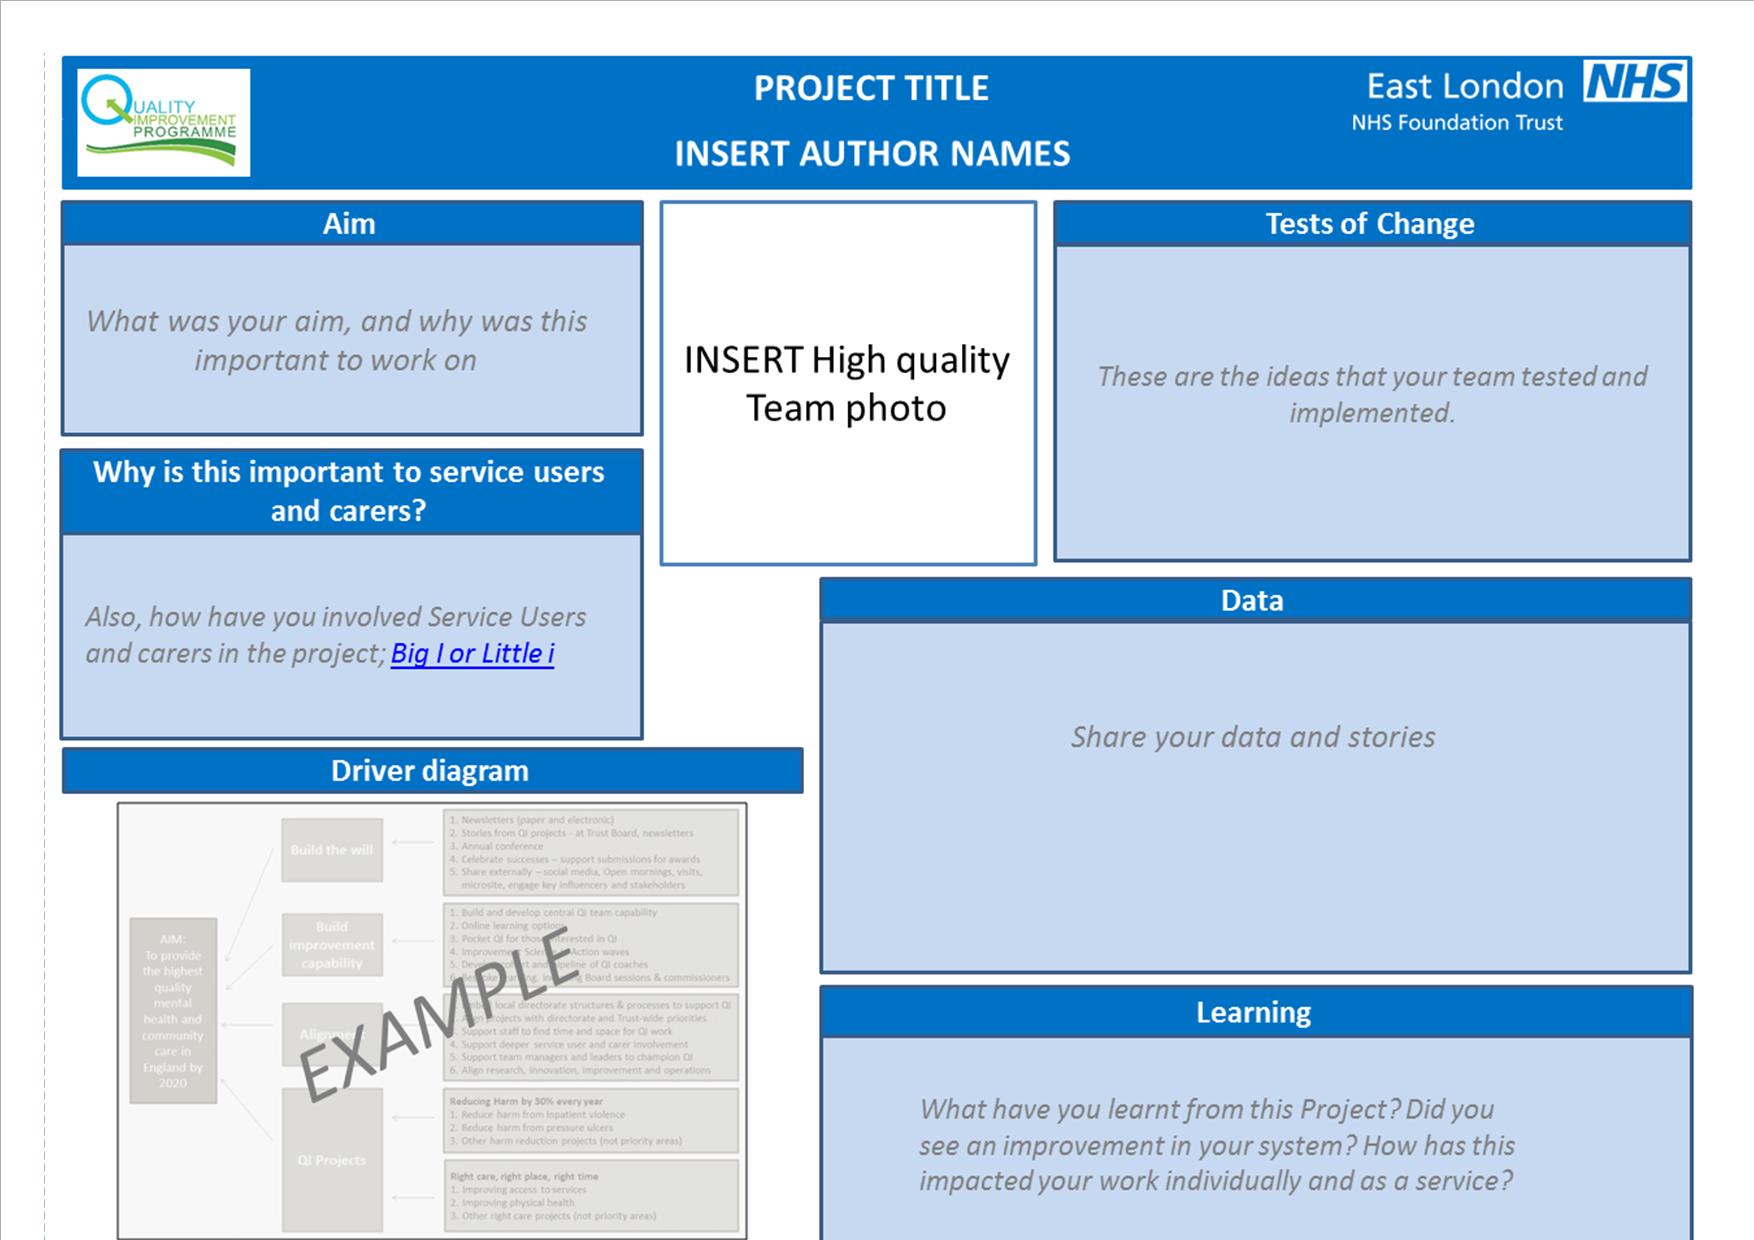 Completed project poster template : Quality Improvement – East London ...